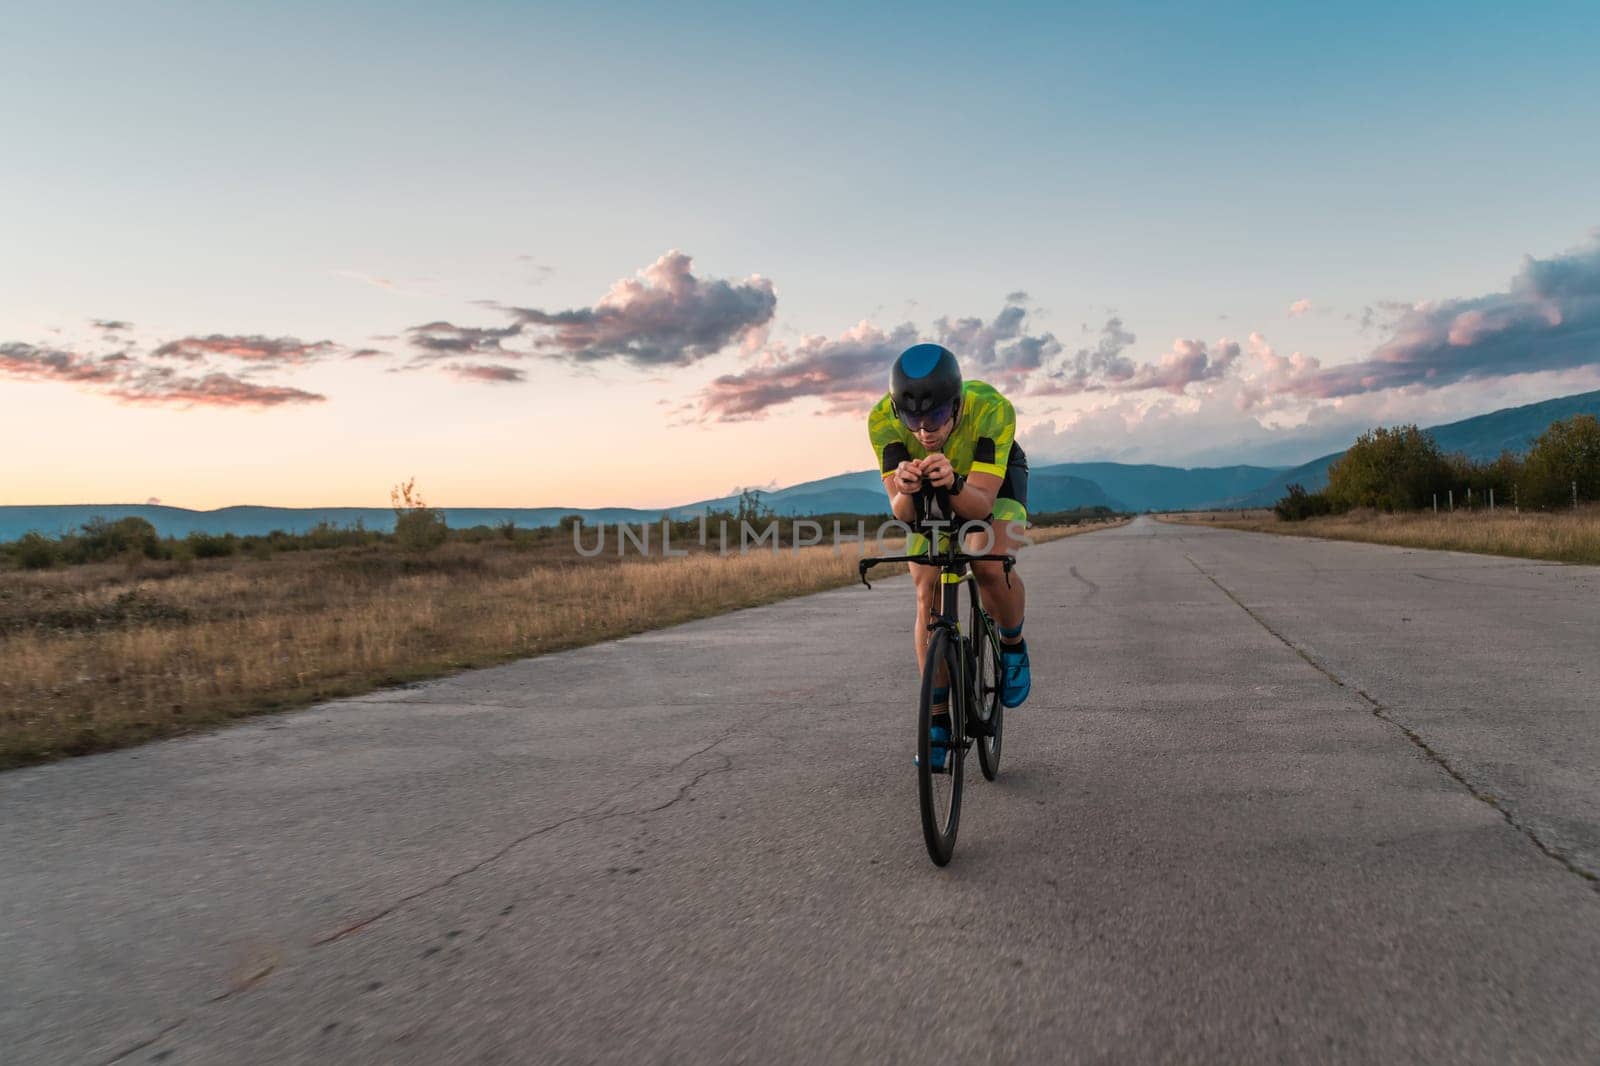 Triathlete riding his bicycle during sunset, preparing for a marathon. The warm colors of the sky provide a beautiful backdrop for his determined and focused effort. by dotshock